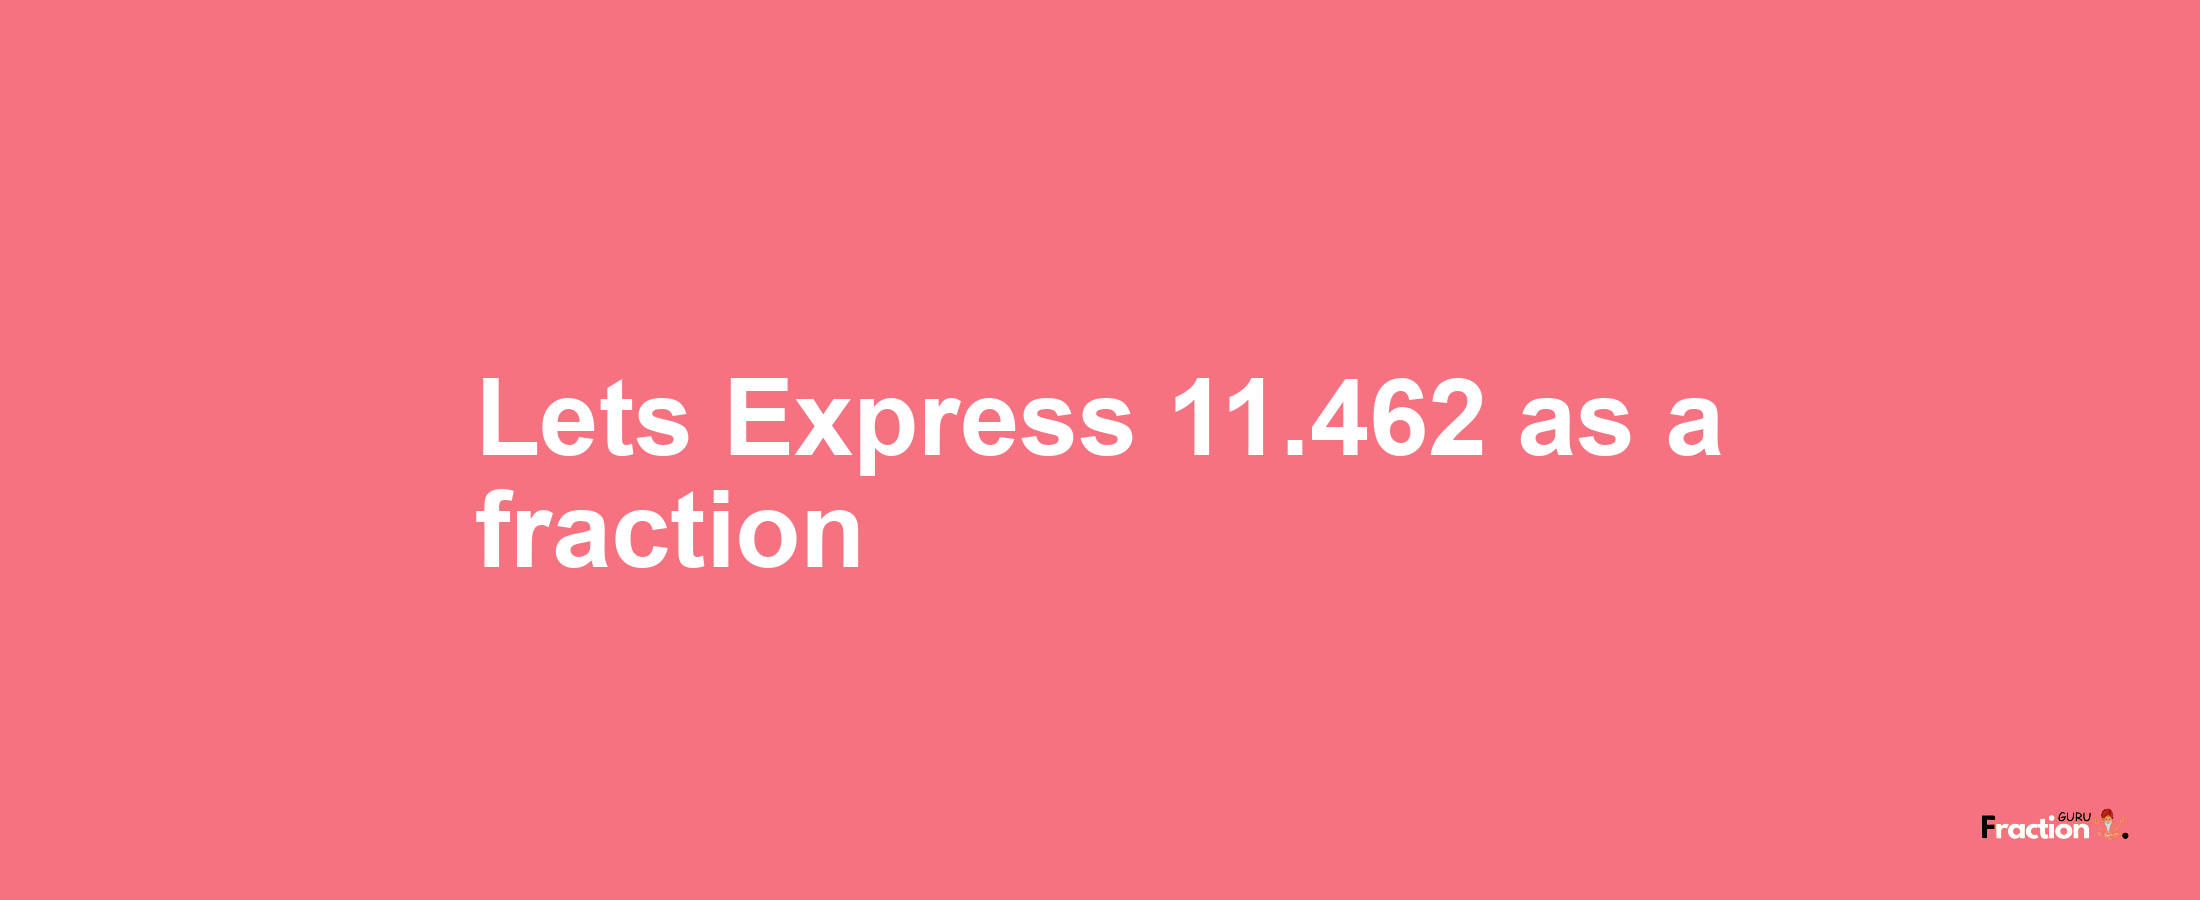 Lets Express 11.462 as afraction